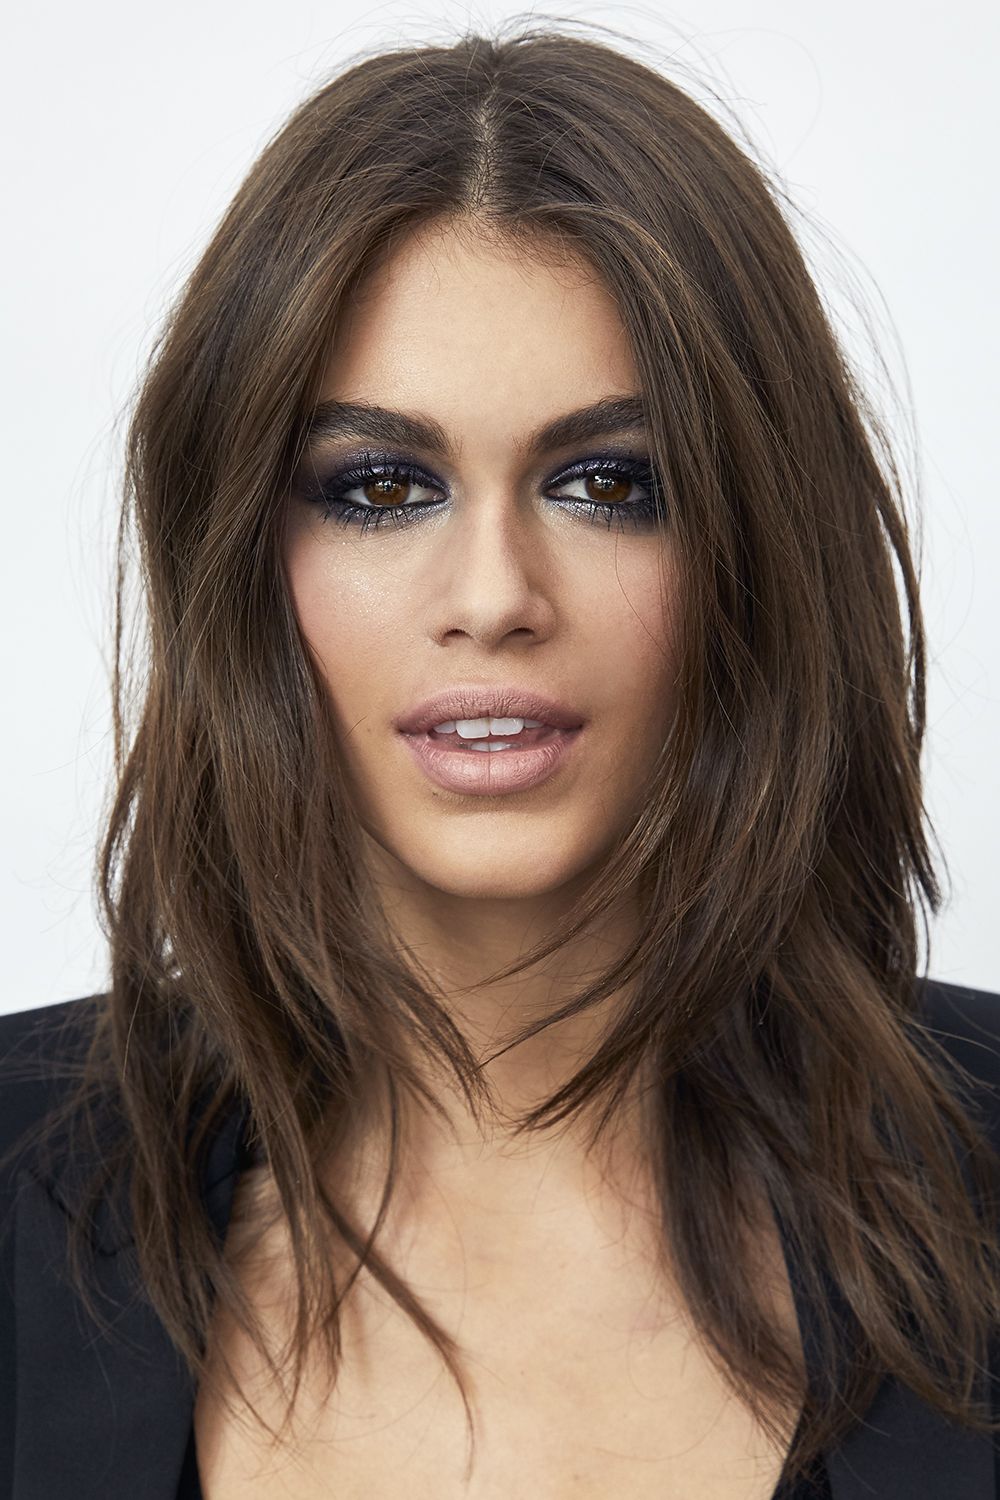 Model Kaia Gerber Is The 17 Year Old Face Of Ysl Beauty Kaia Gerber